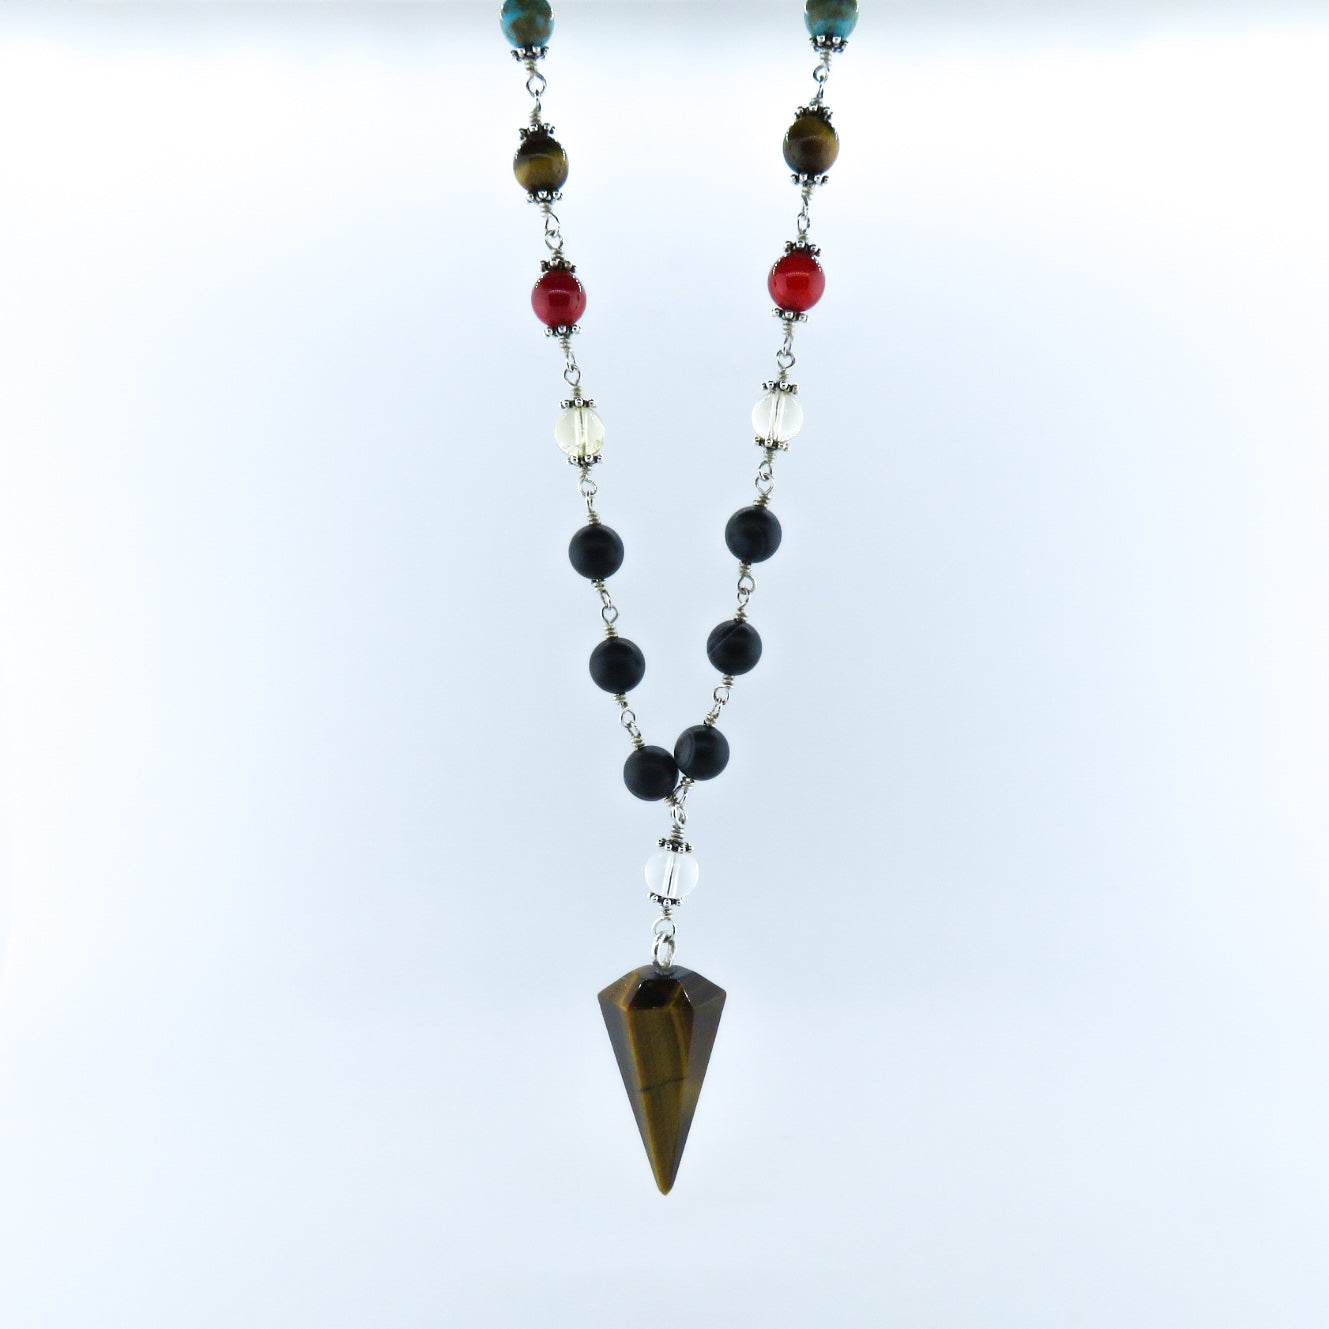 7 Chakras Beads Necklace with Tiger's Eye, Agate and Sterling Silver